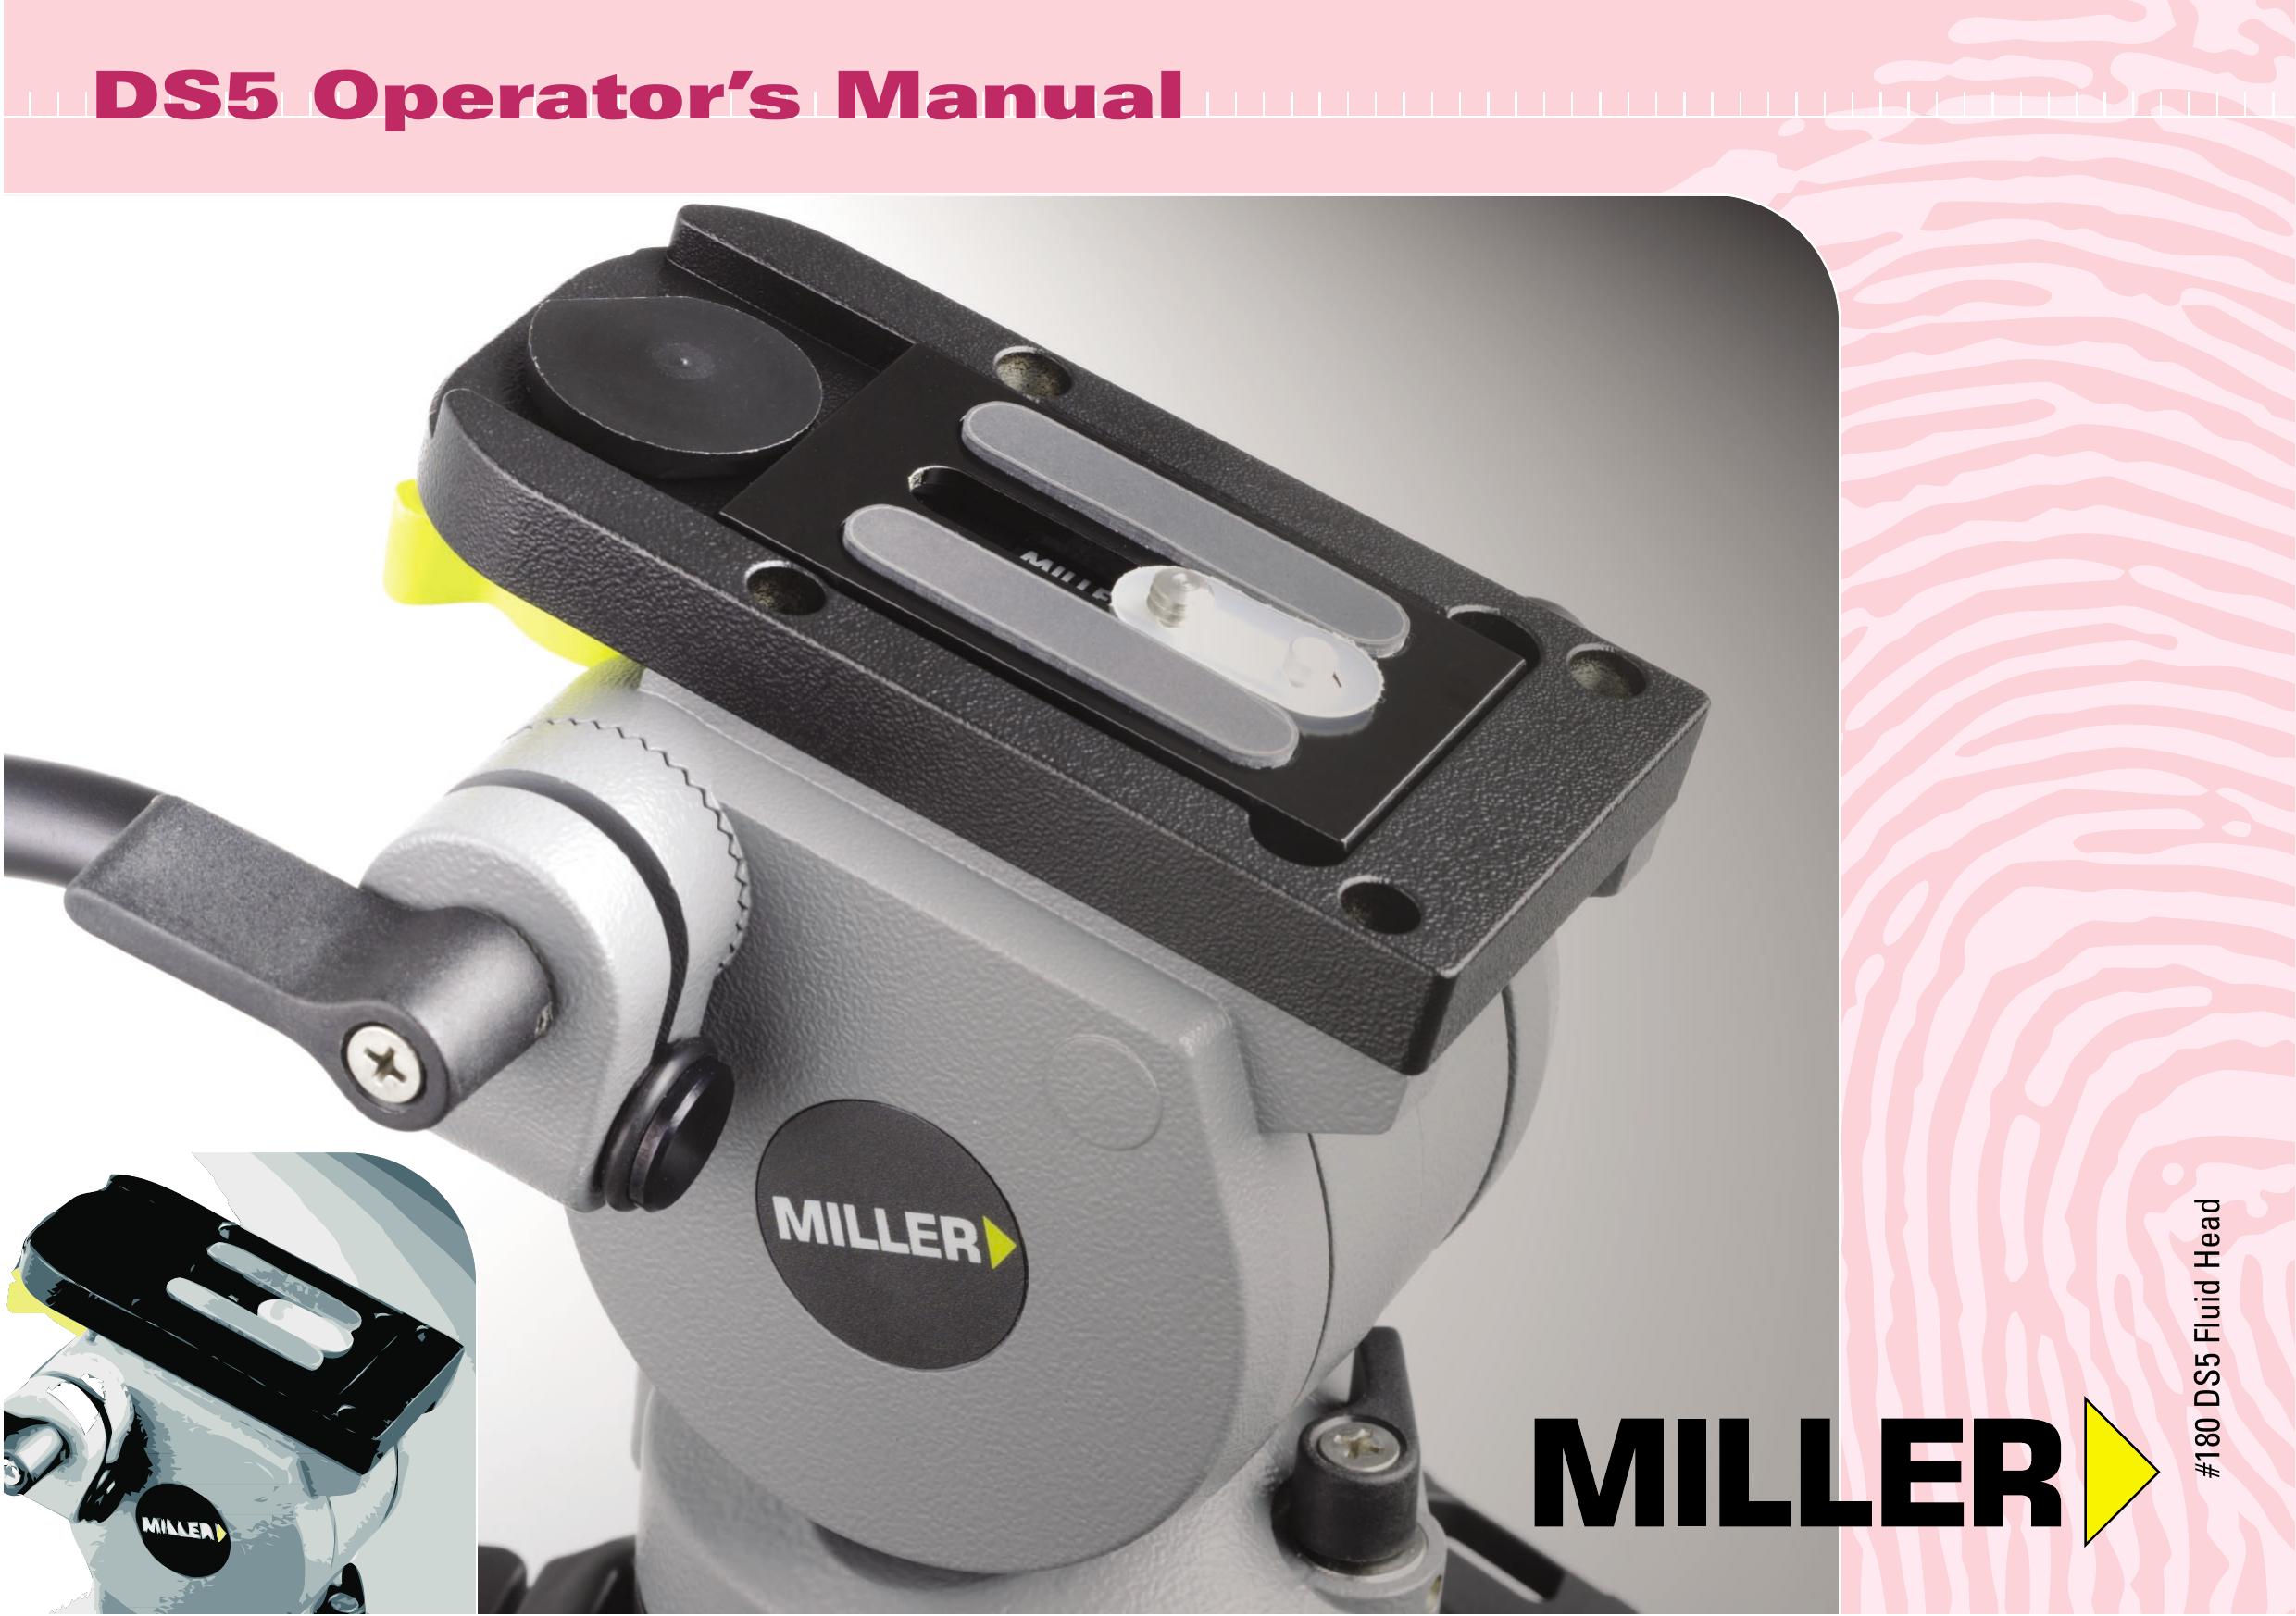 Miller Camera Support DS5 Camcorder Accessories User Manual